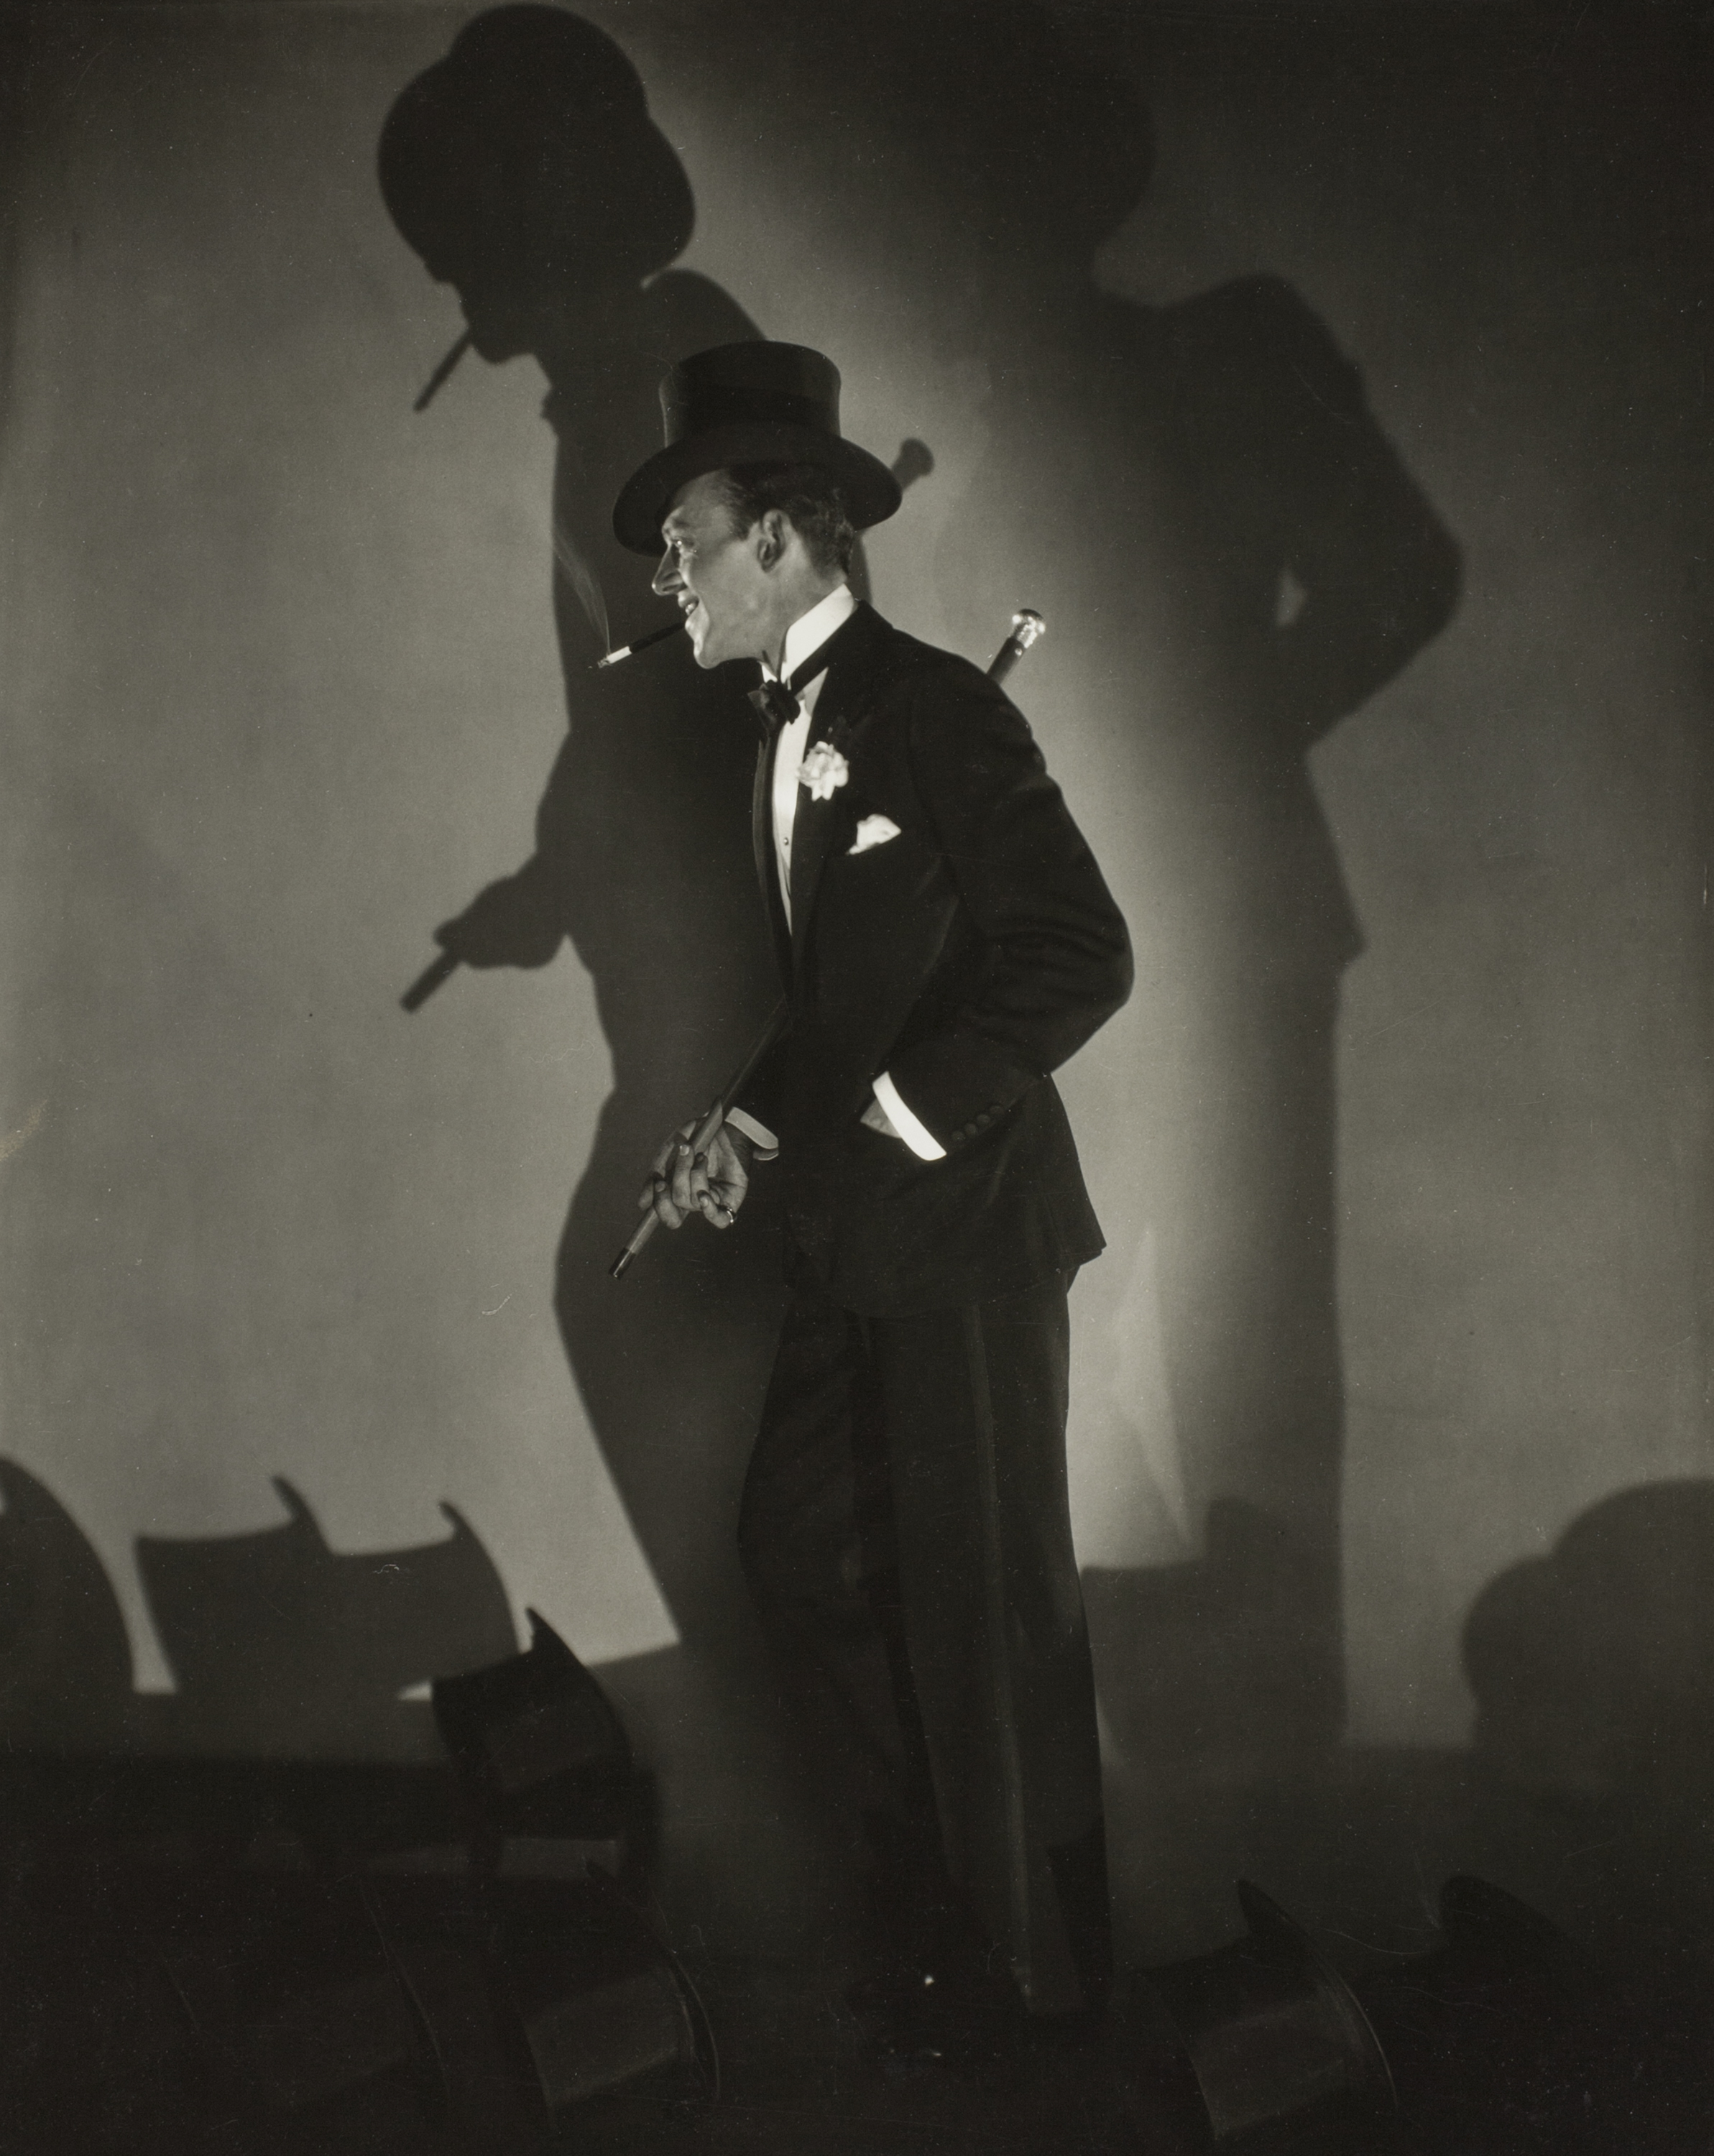 Edward Steichen. Fred Astaire in Funny Face, 1927. The Art Institute of Chicago, Bequest of Edward Steichen by direction of Joanna T. Steichen and George Eastman House. © 2014 The Estate of Edward Steichen/Artists Rights Society (ARS), New York.